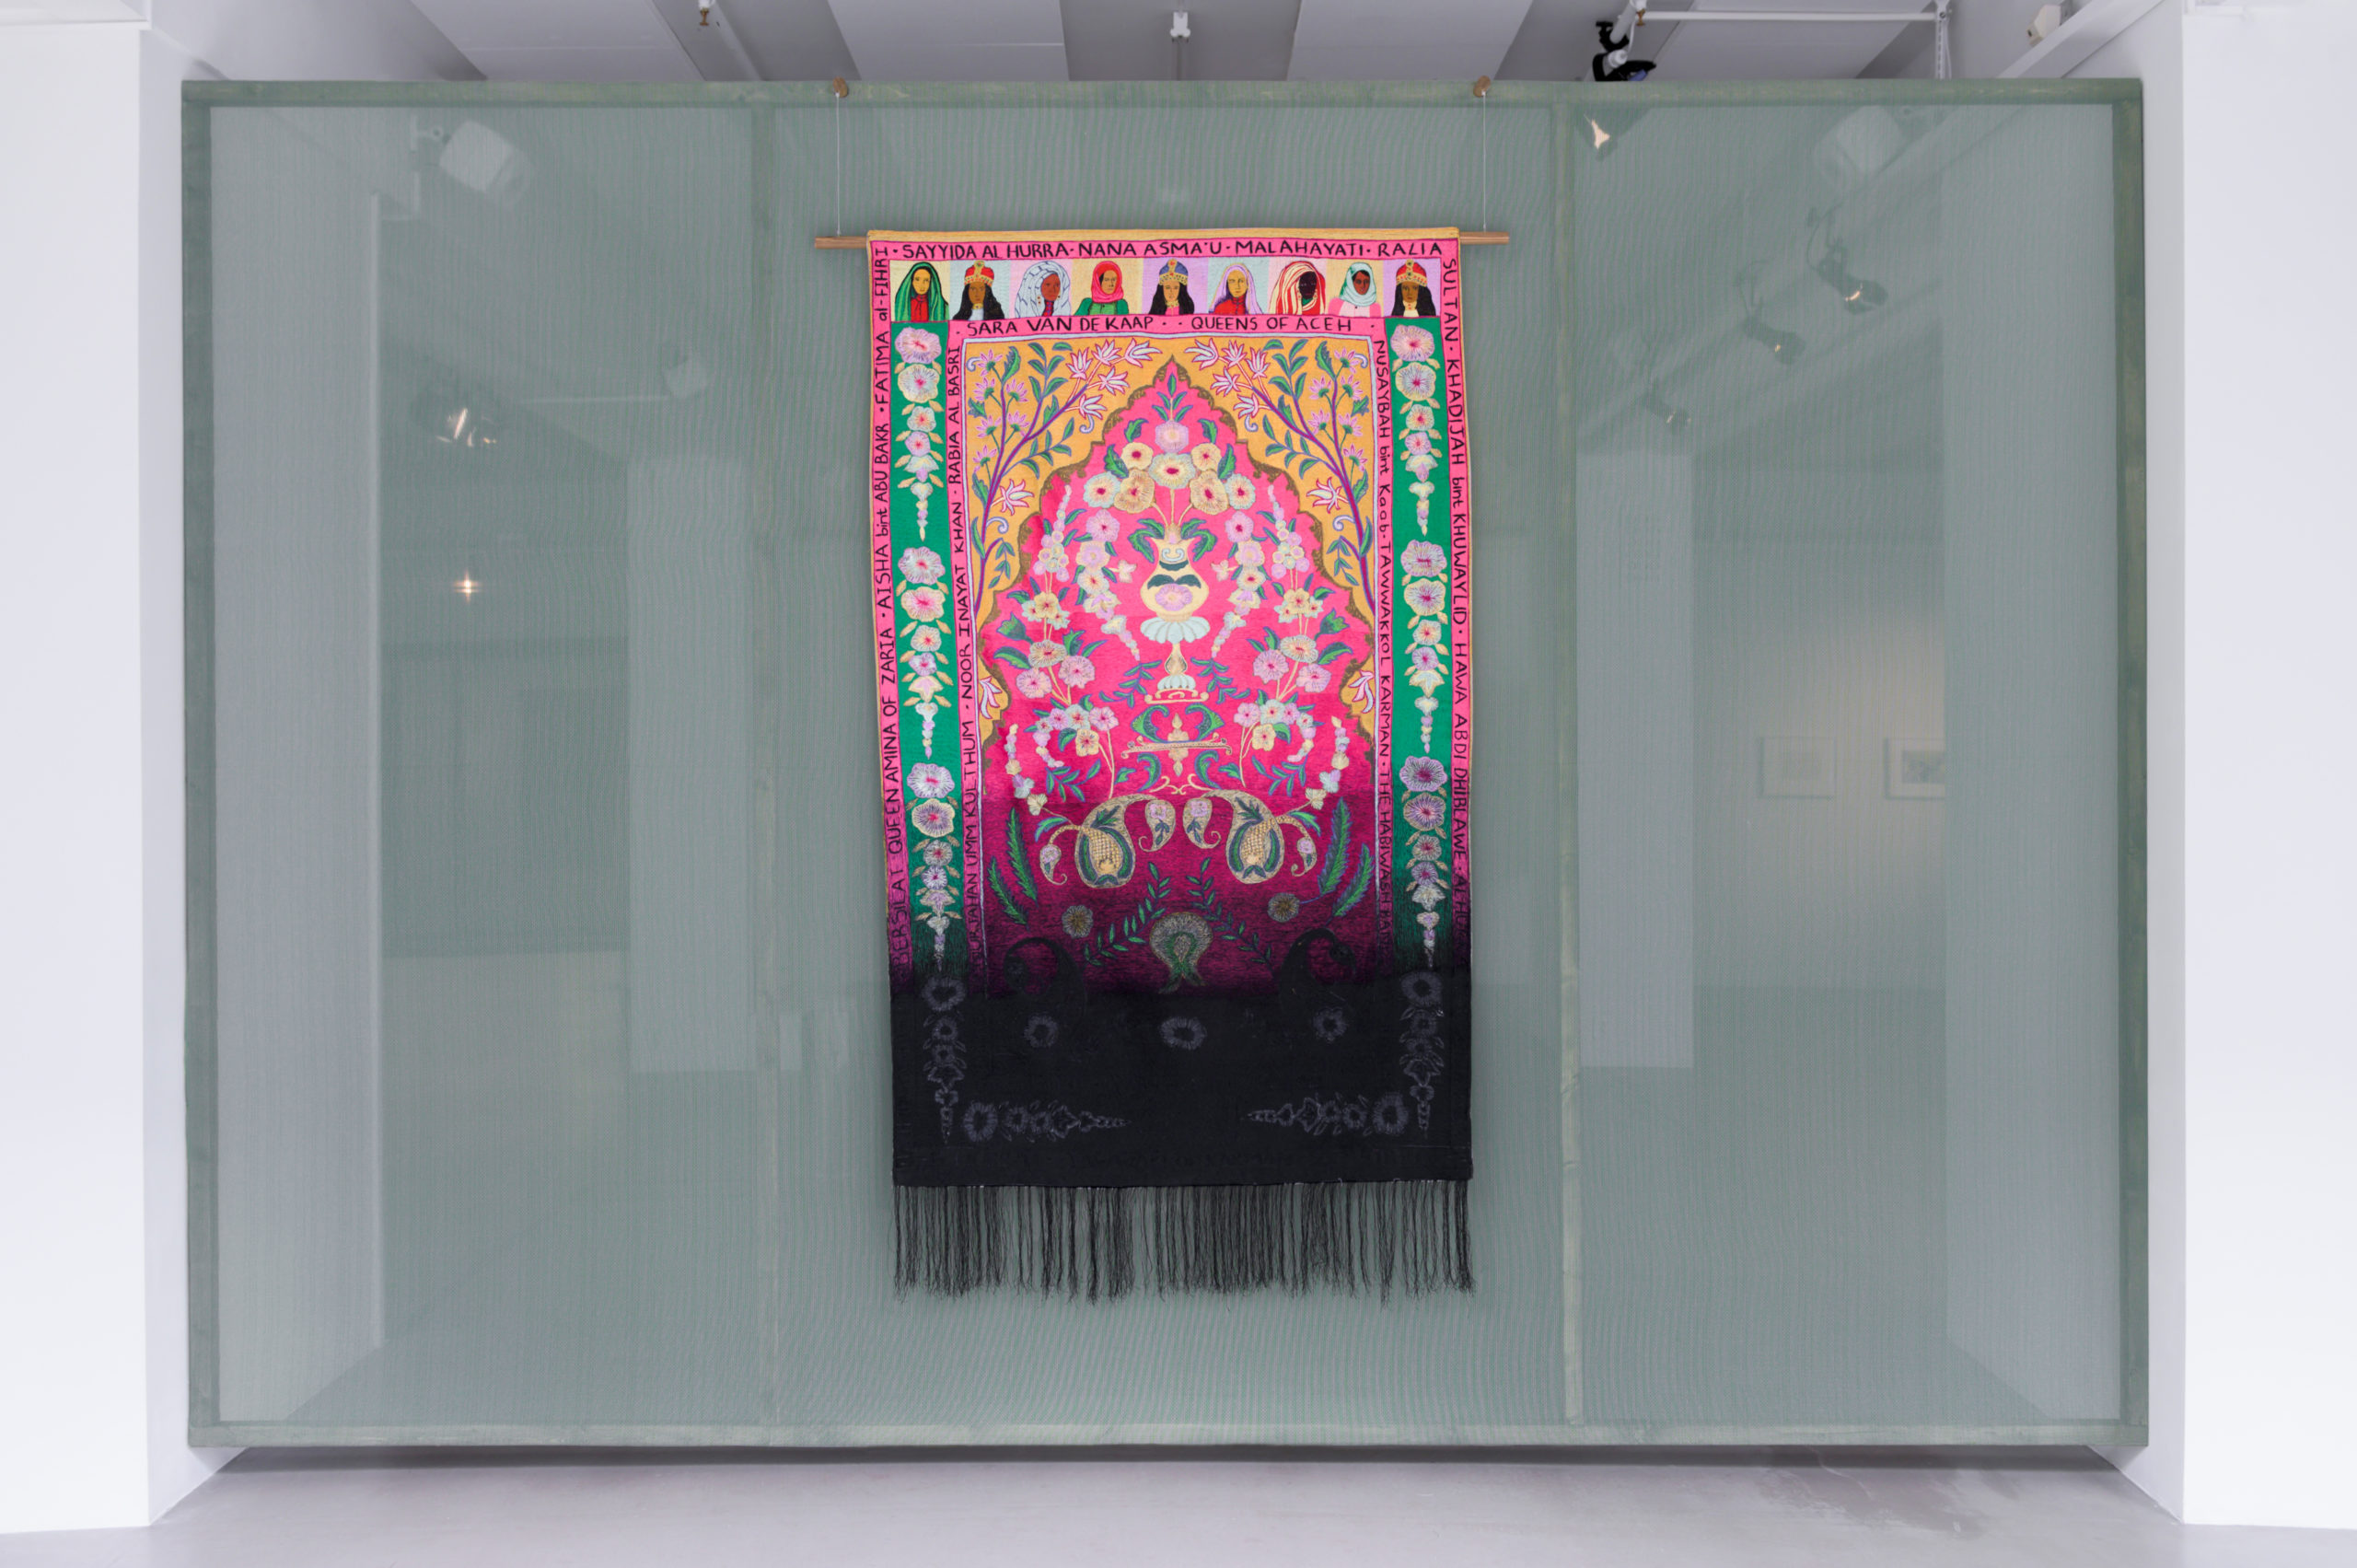 Thania Petersen, Al Hurra (2019), embroidery on cotton fabric, 228 x 128 cm. Courtesy the artist and Smac Gallery. Loan from Durban Art Gallery. Photo: Daniel Vincent Hansen. In the exhibition Unweaving the binary code at Kunsthall Trondheim as part of the 3rd Hannah Ryggen Triennale, 2022.